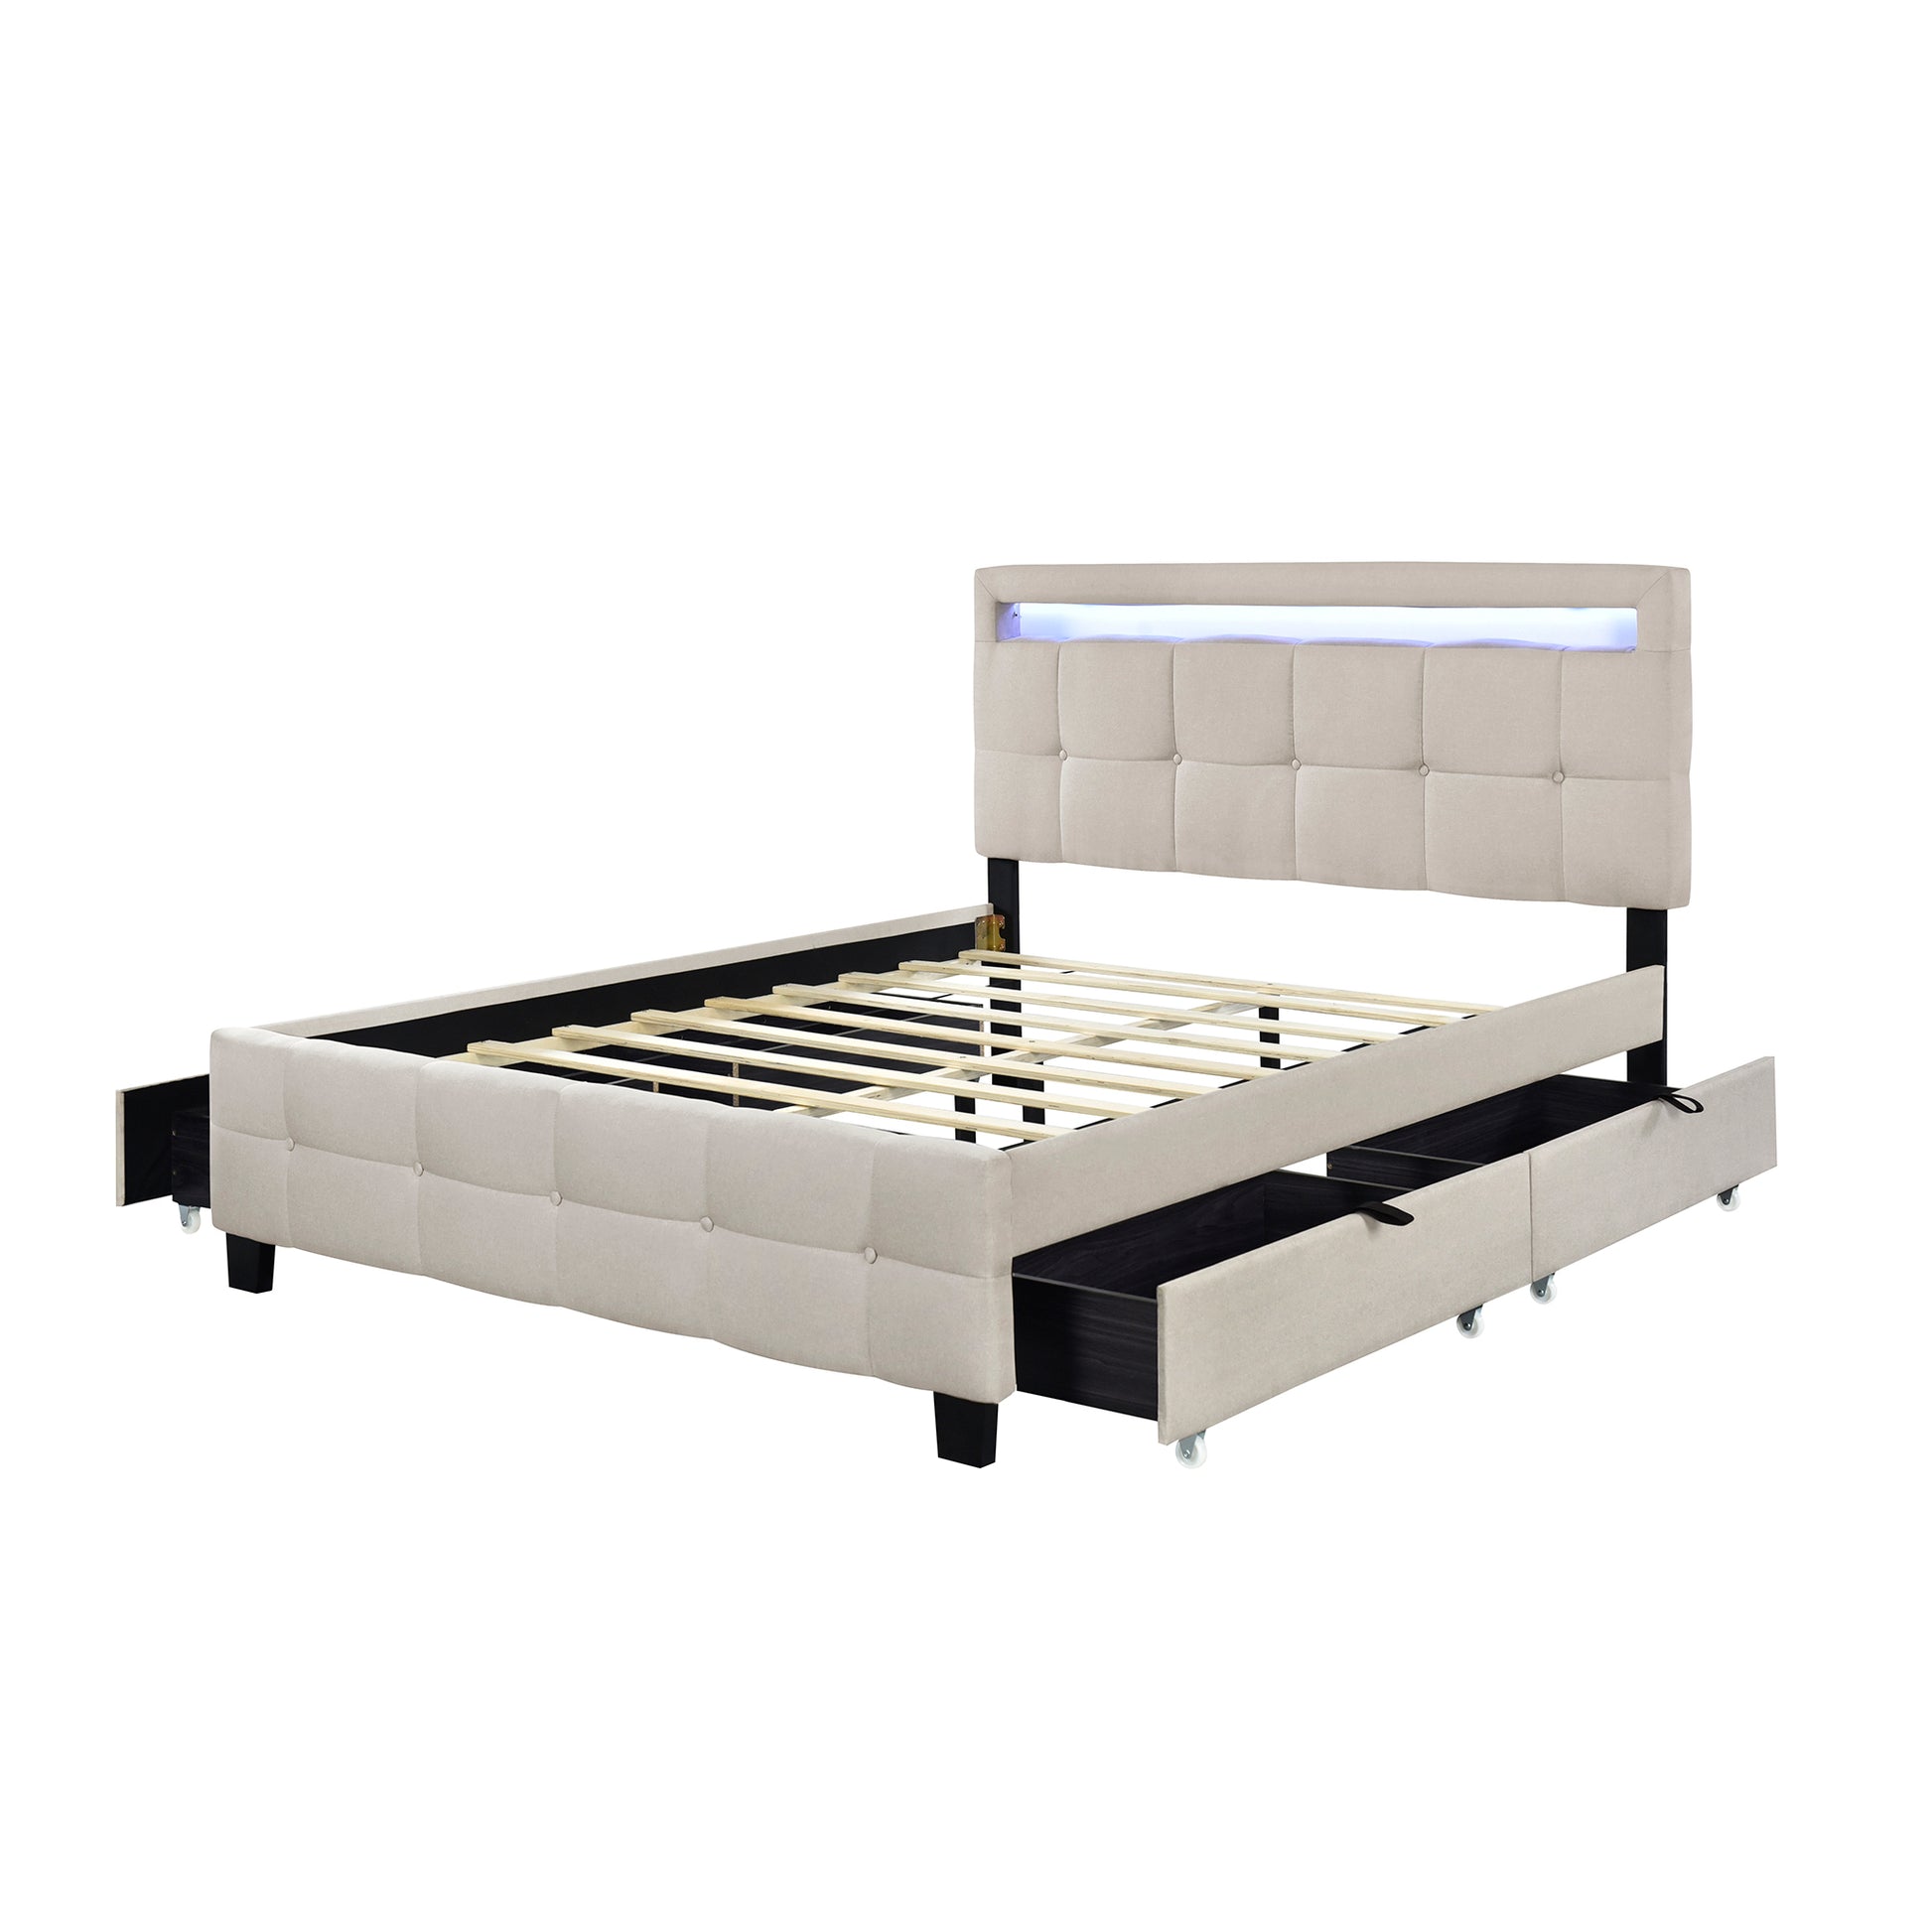 Queen Size Upholstered Platform Bed with LED Frame and 4 Drawers, Linen Fabric, Beige - Enova Luxe Home Store